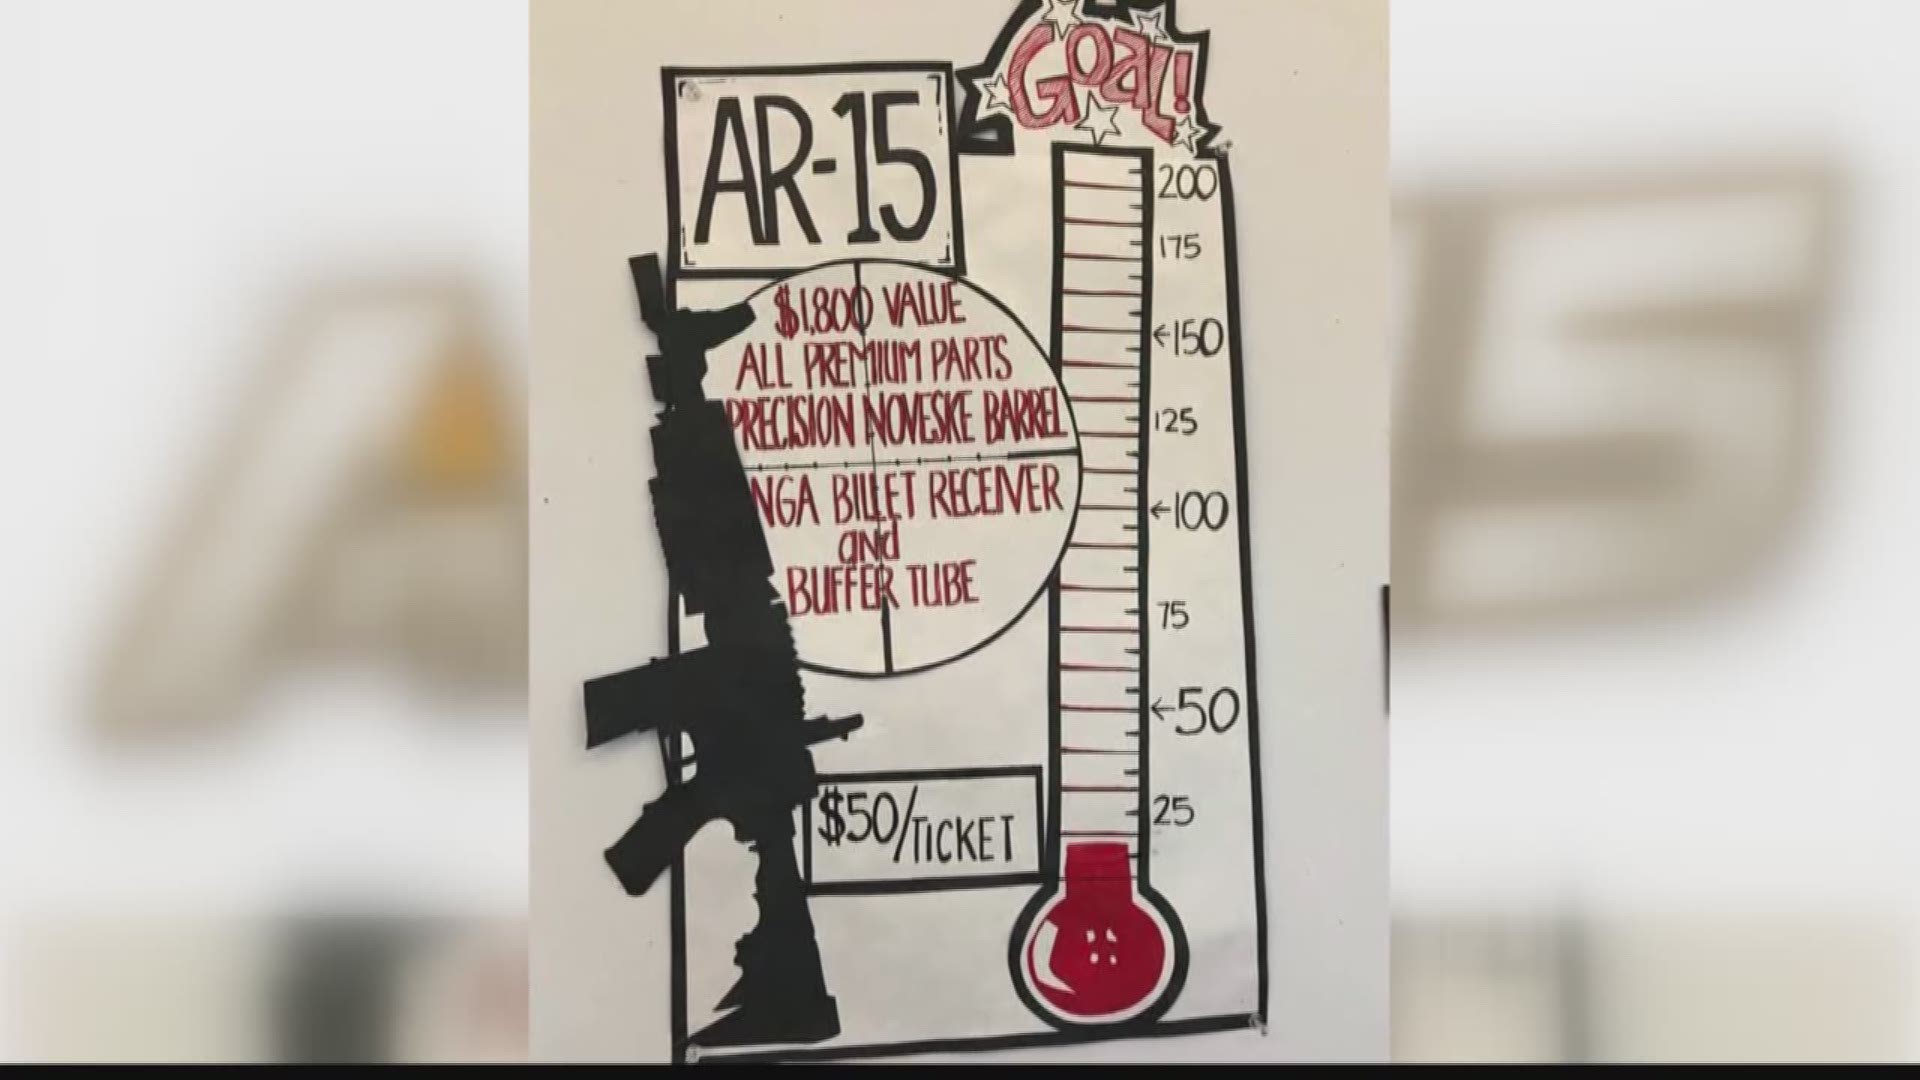 ccording to a Jan. 30 post from the Classical Christian Academy's Royal Raffle and Benefit Ball Facebook page, the school will auction an AR-15 rifle valued at $1800 on Mar. 10.